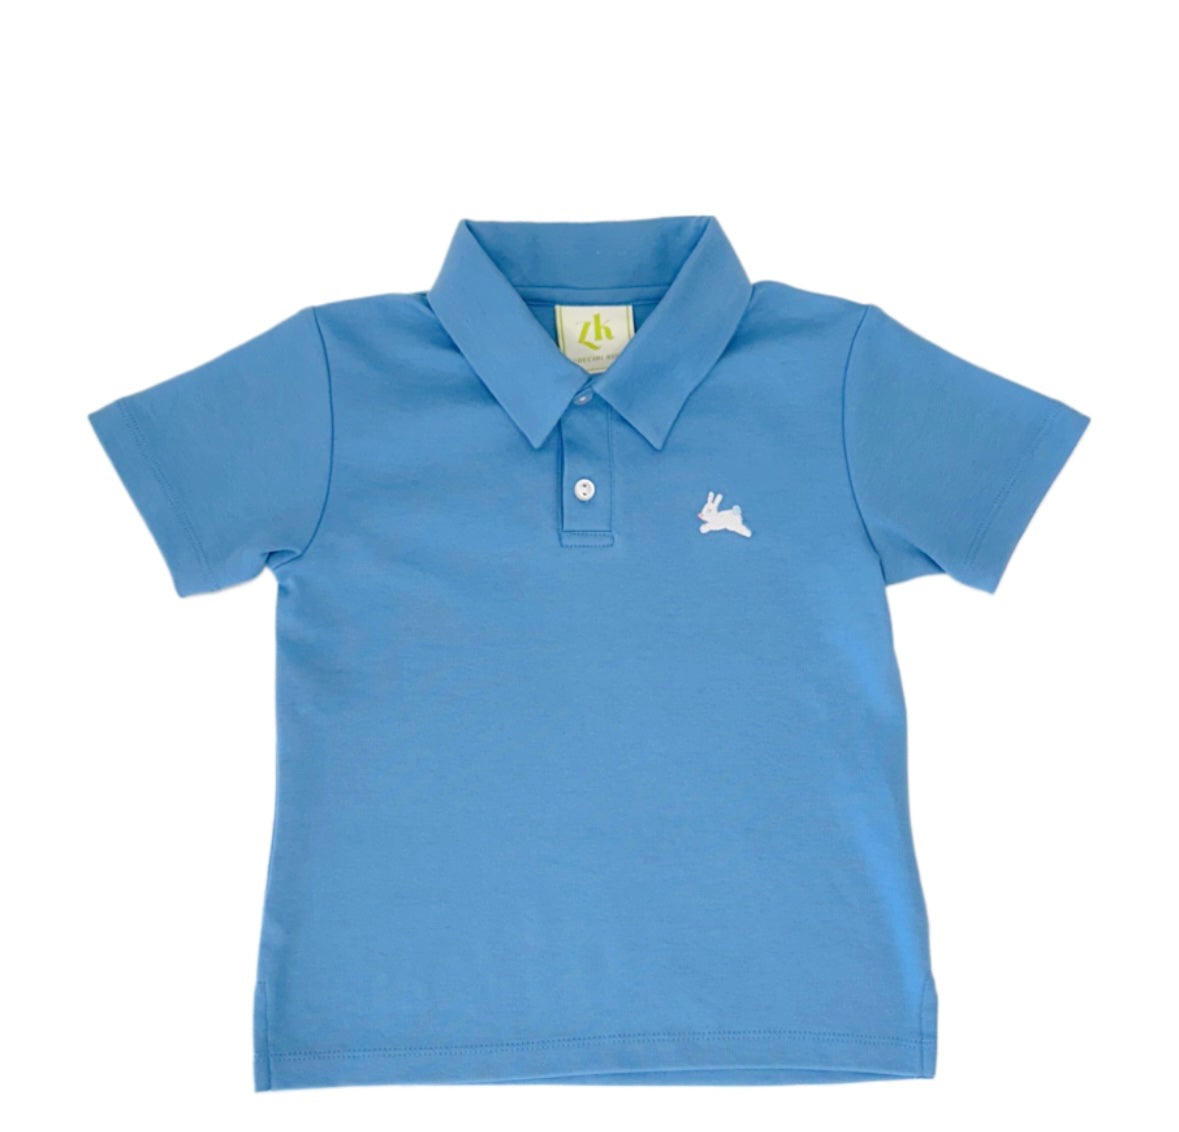 Bunny Polo Shirt - Periwinkle